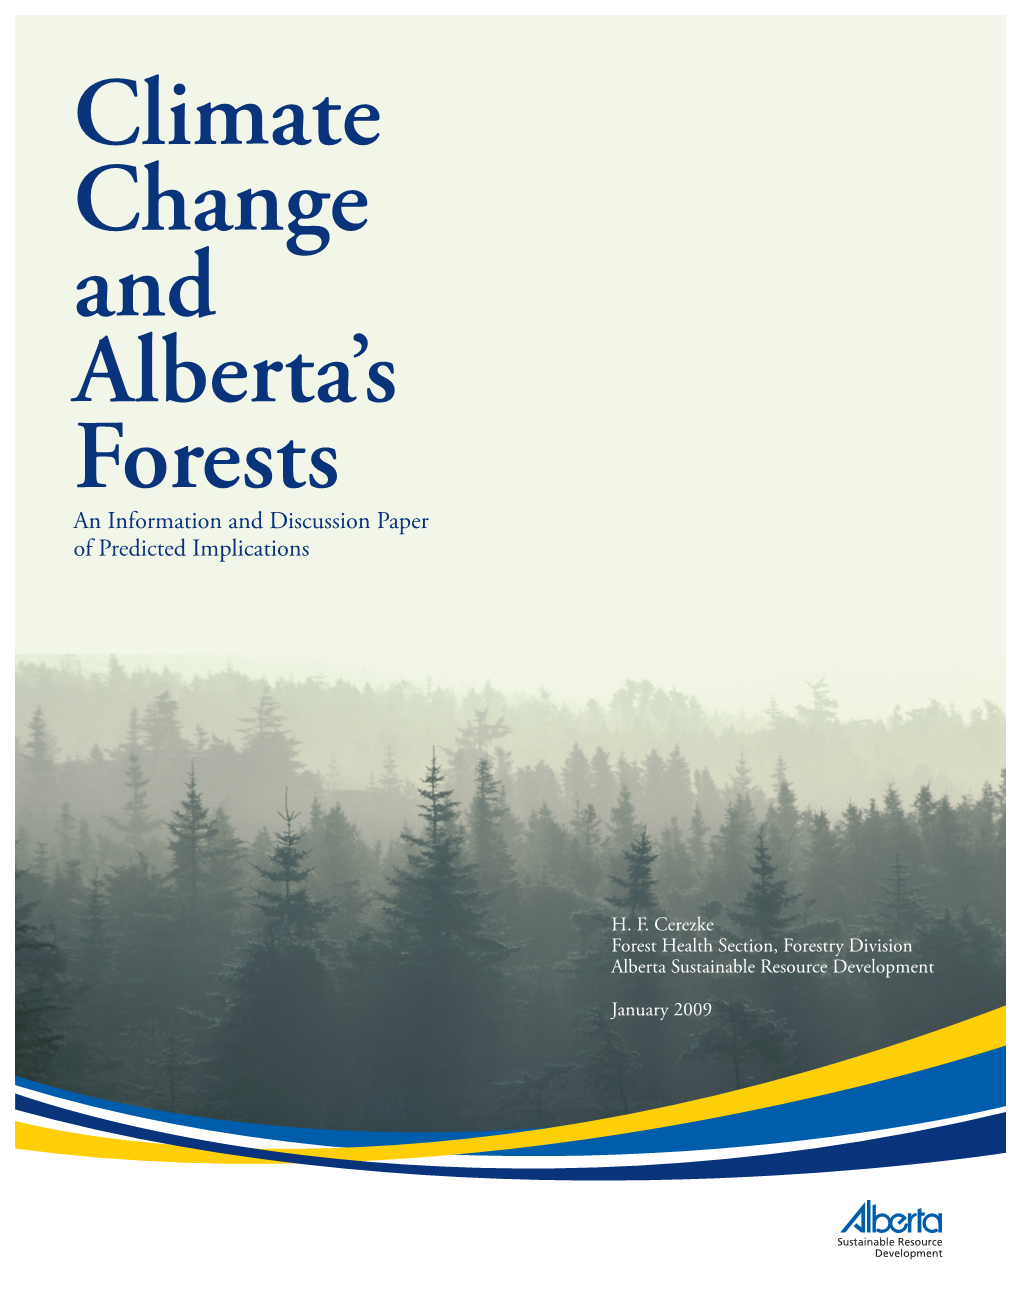 Climate Change and Alberta's Forests